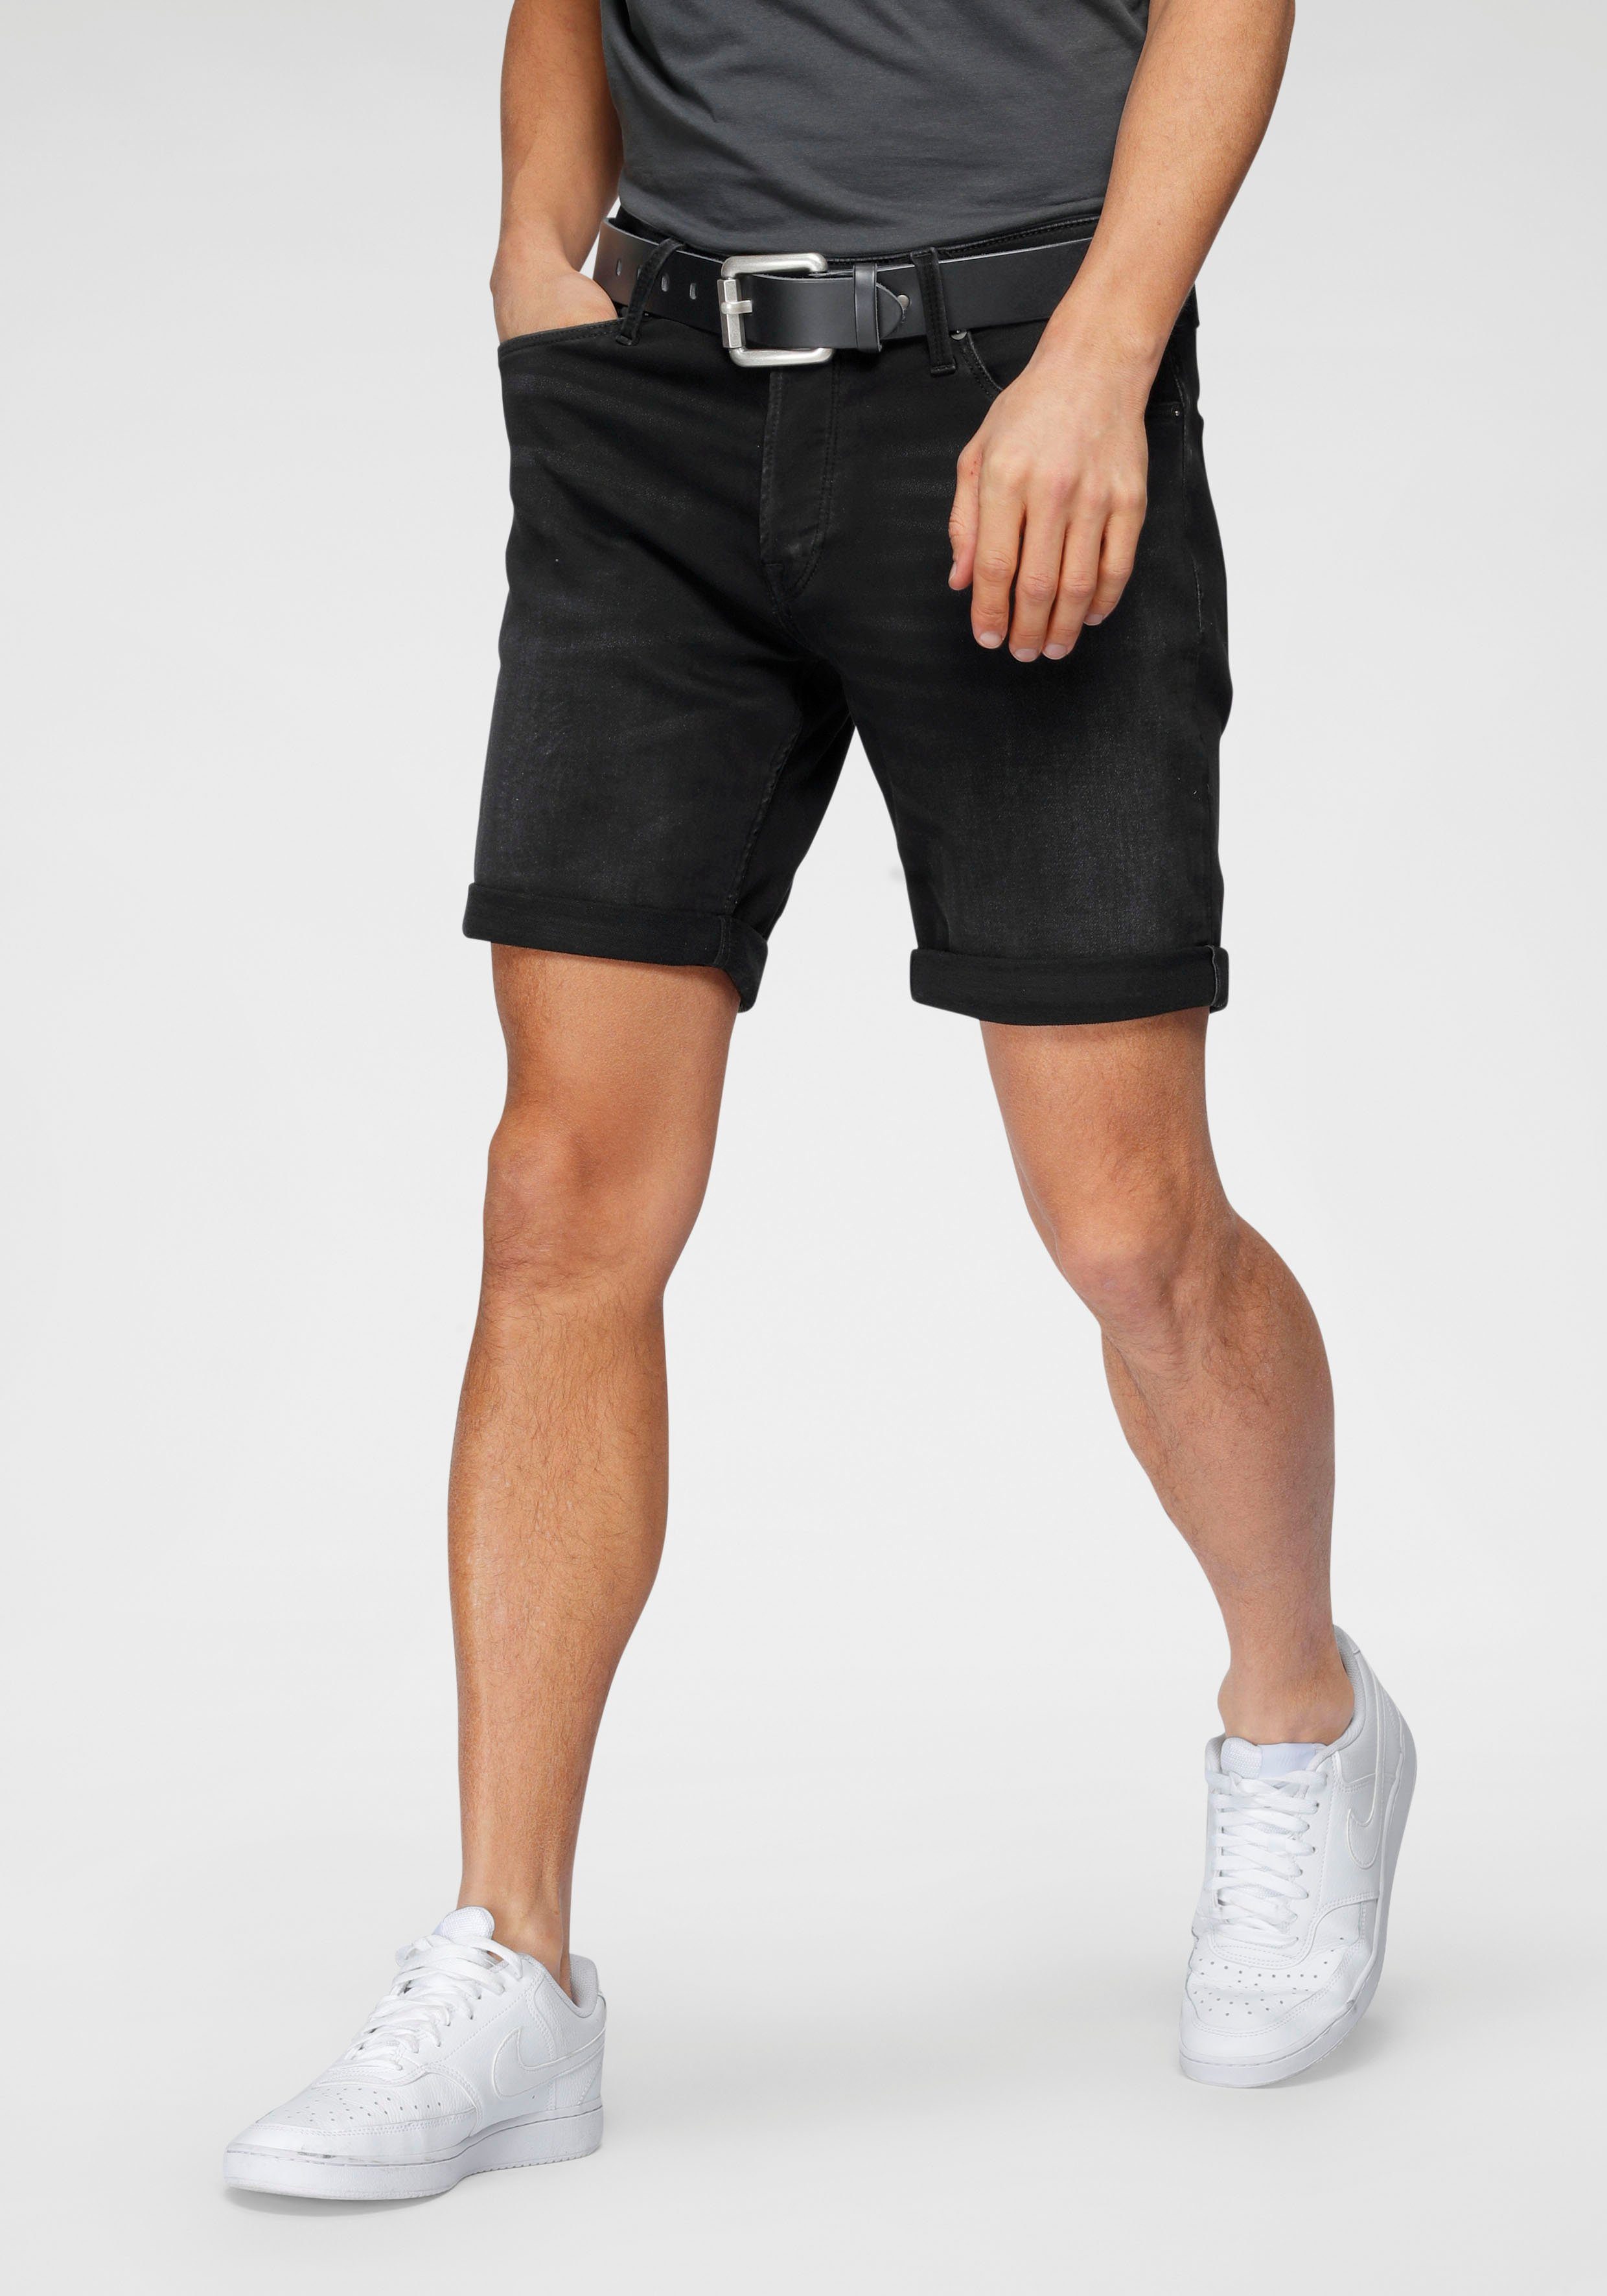 DNM BLUE & NOOS Jeansshorts LIGHT 5189 ONLY SONS schwarz SHORTS ONSPLY